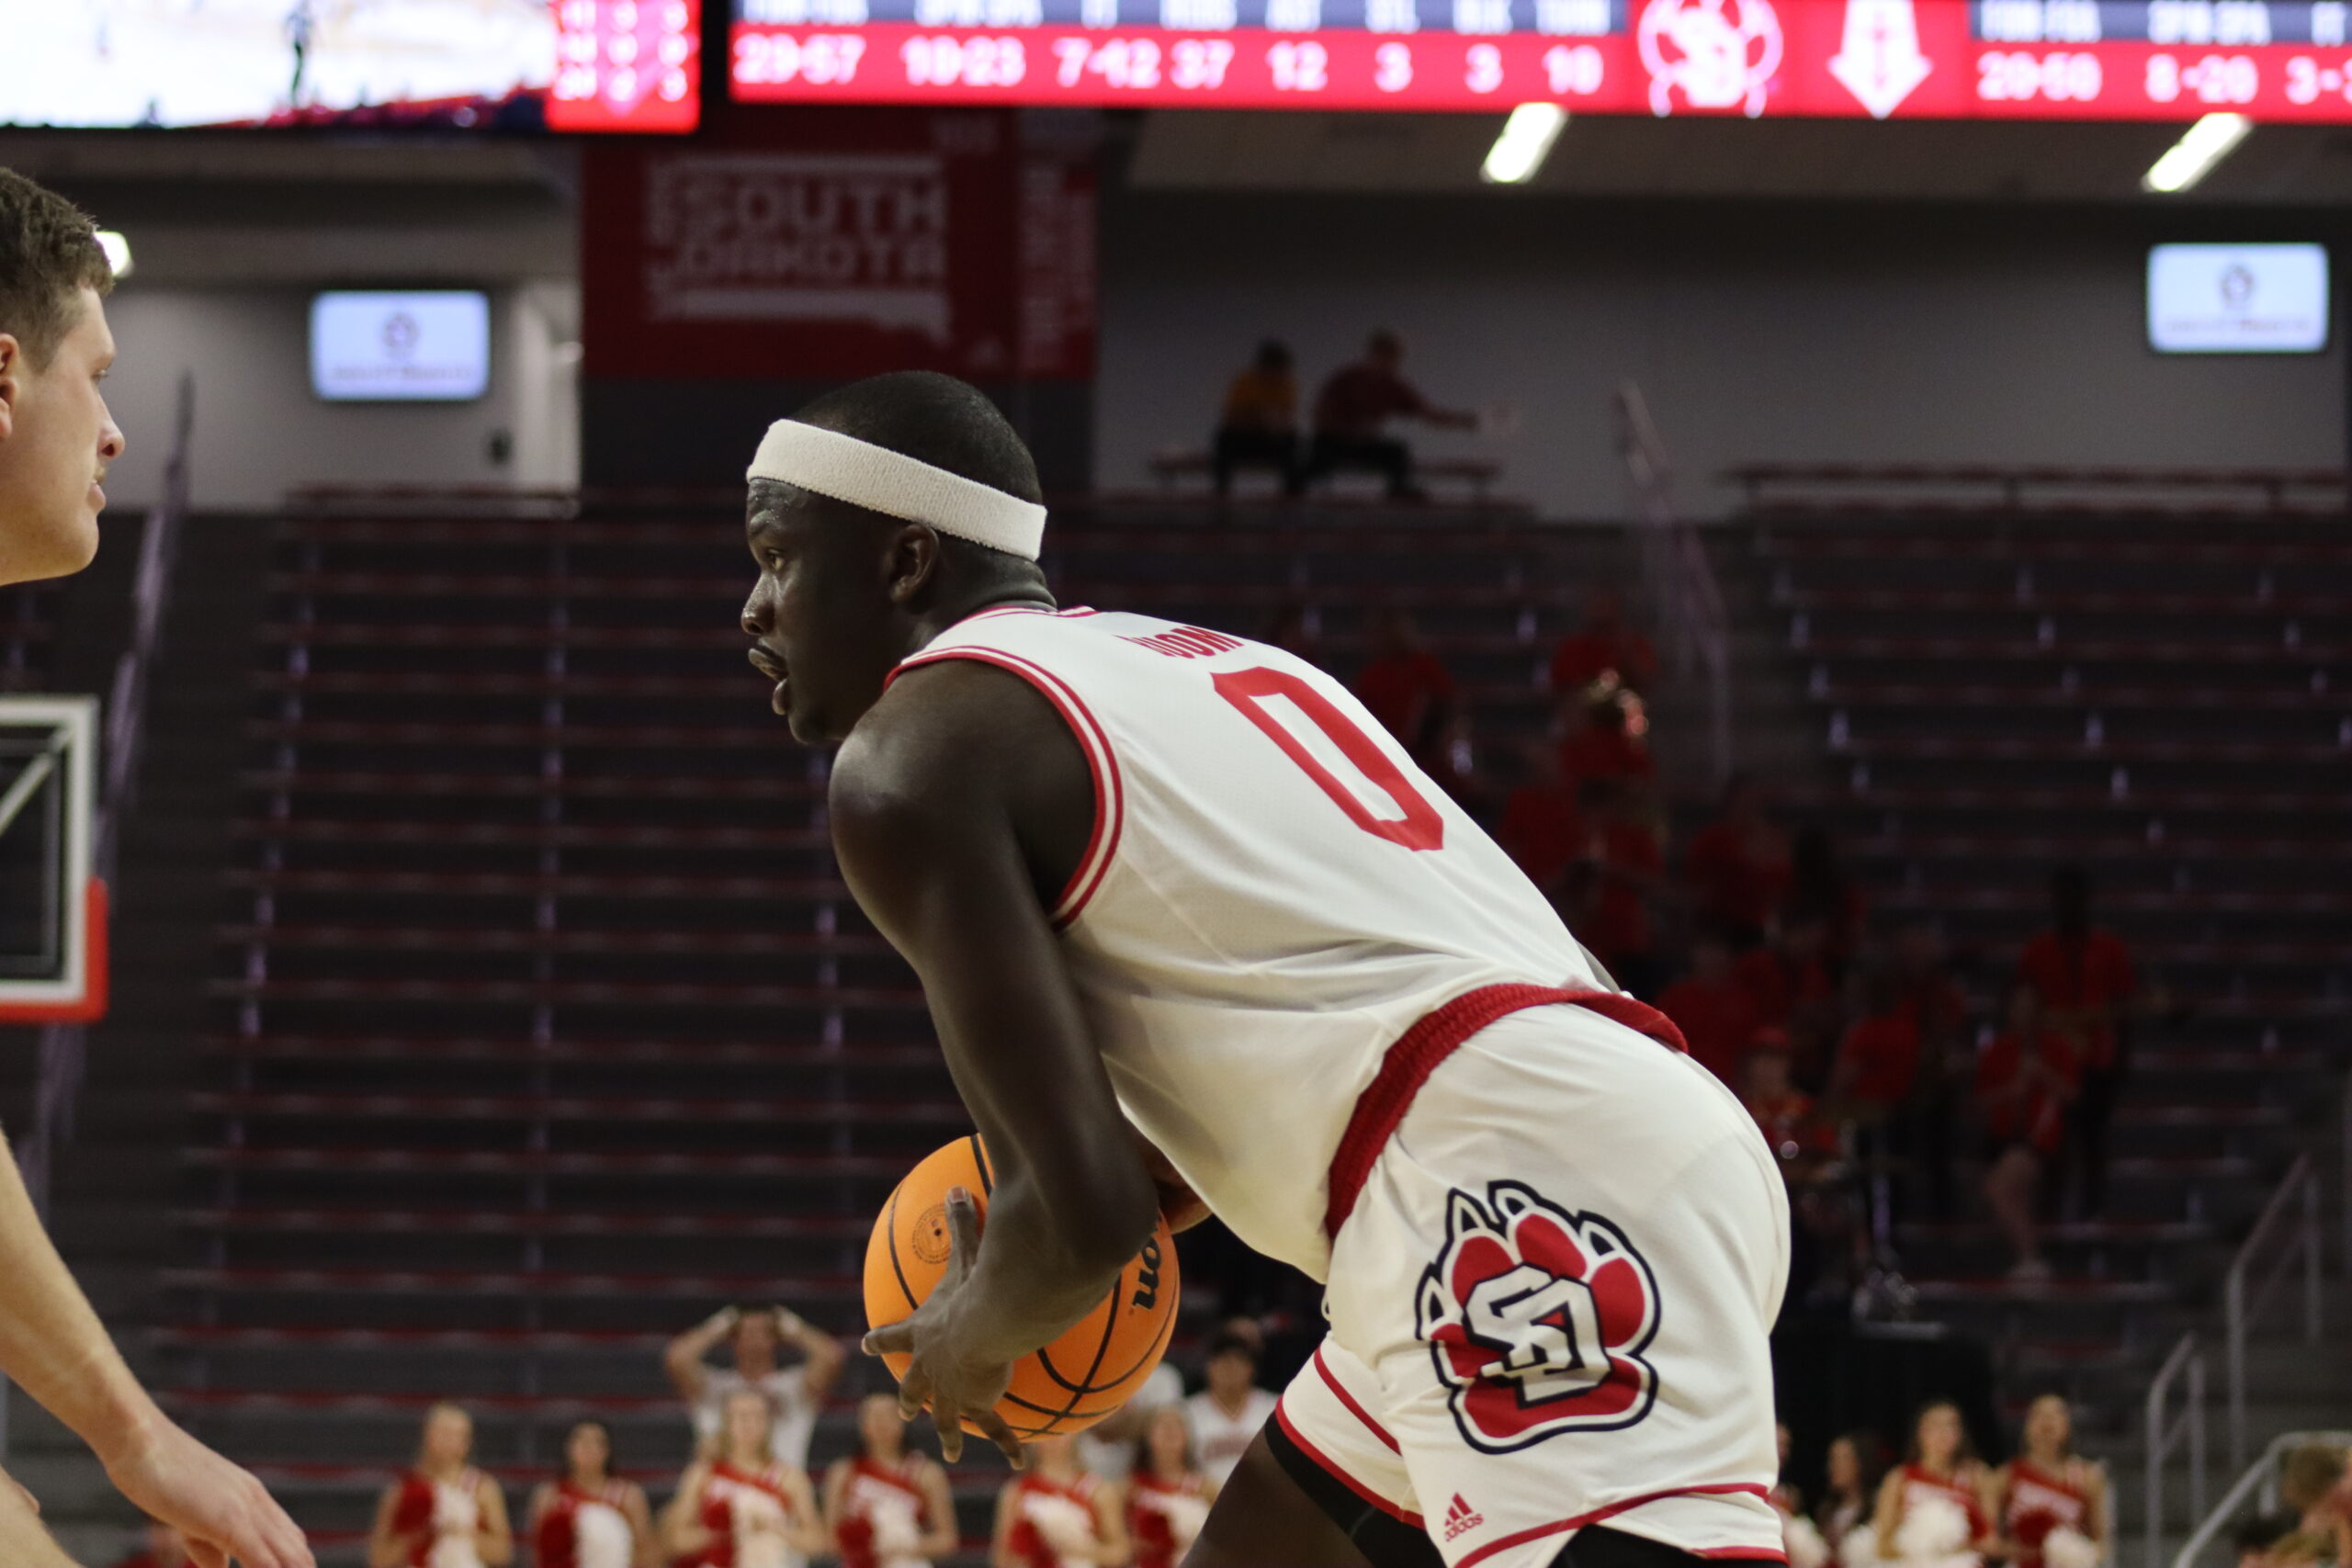 Men’s and Women’s Basketball Upcoming Games Preview